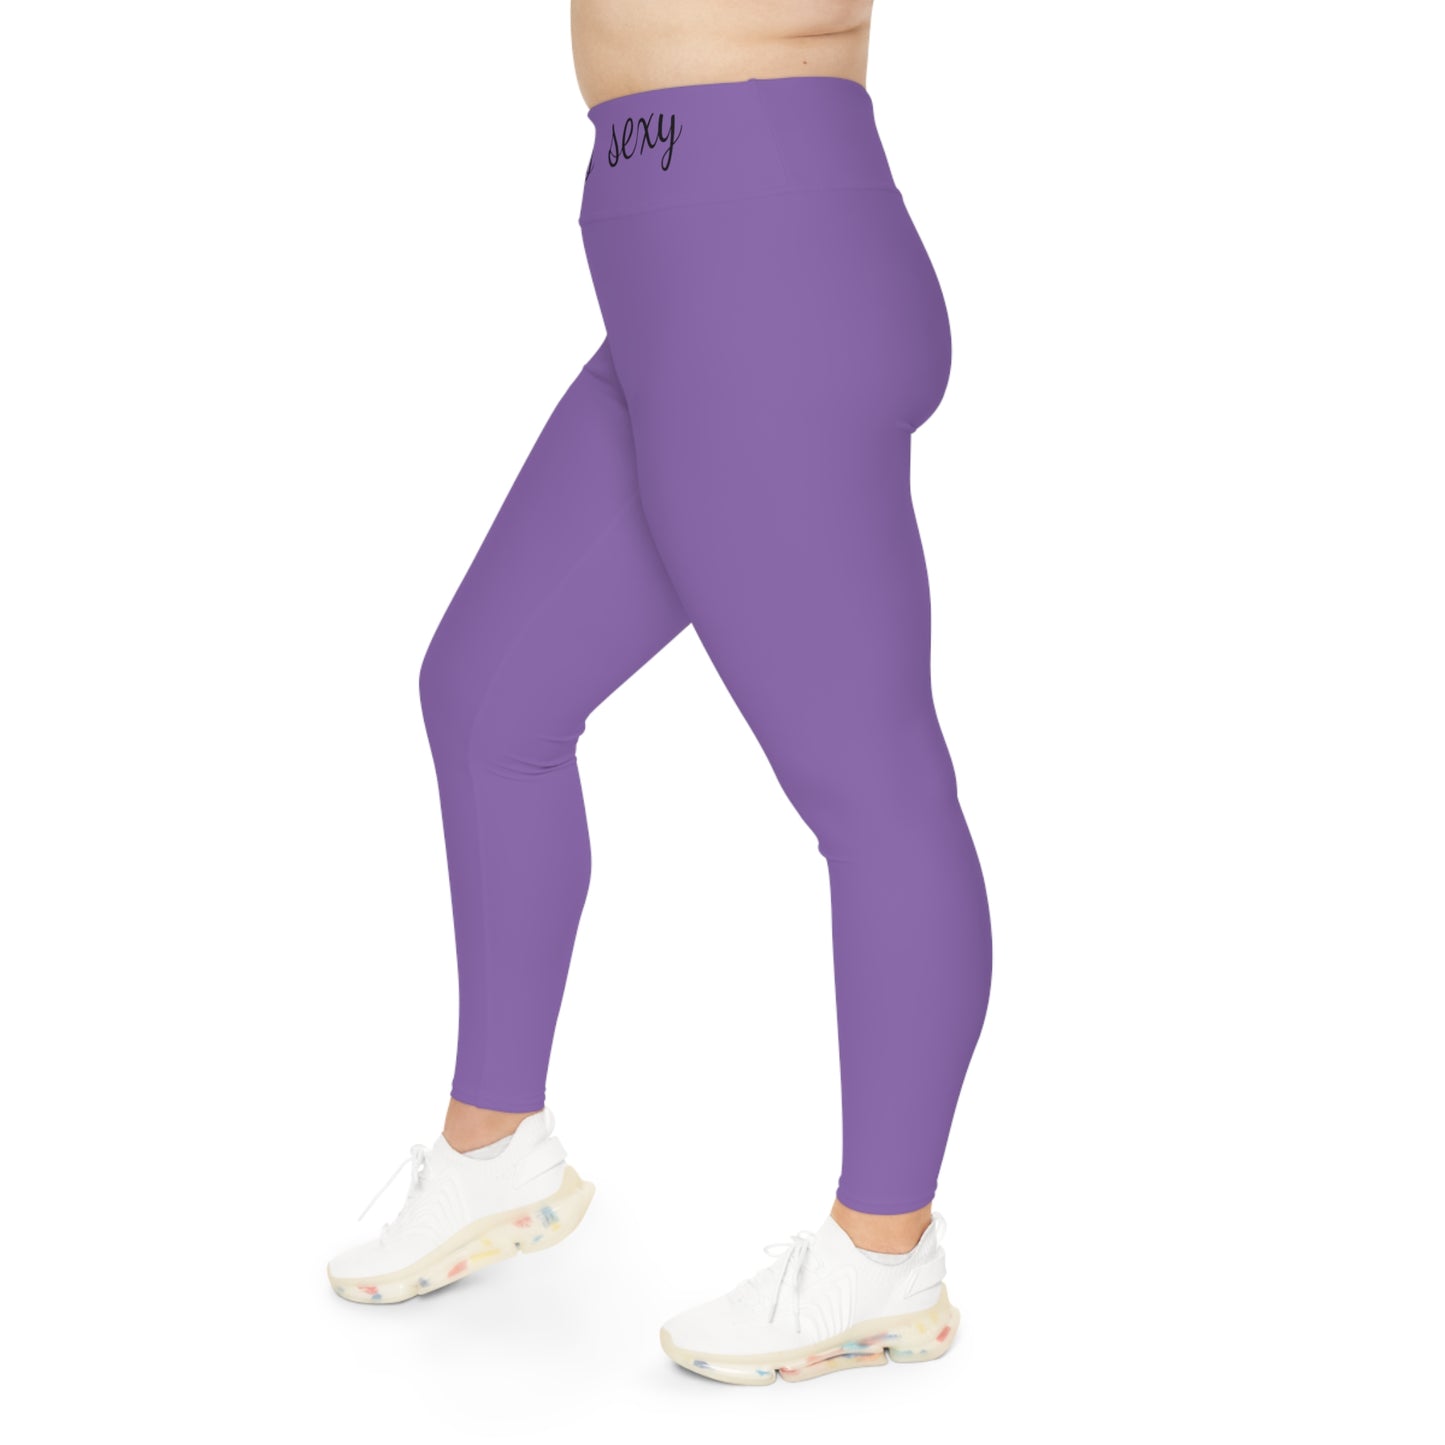 Can you handle the curves? Purple: Plus Size Leggings